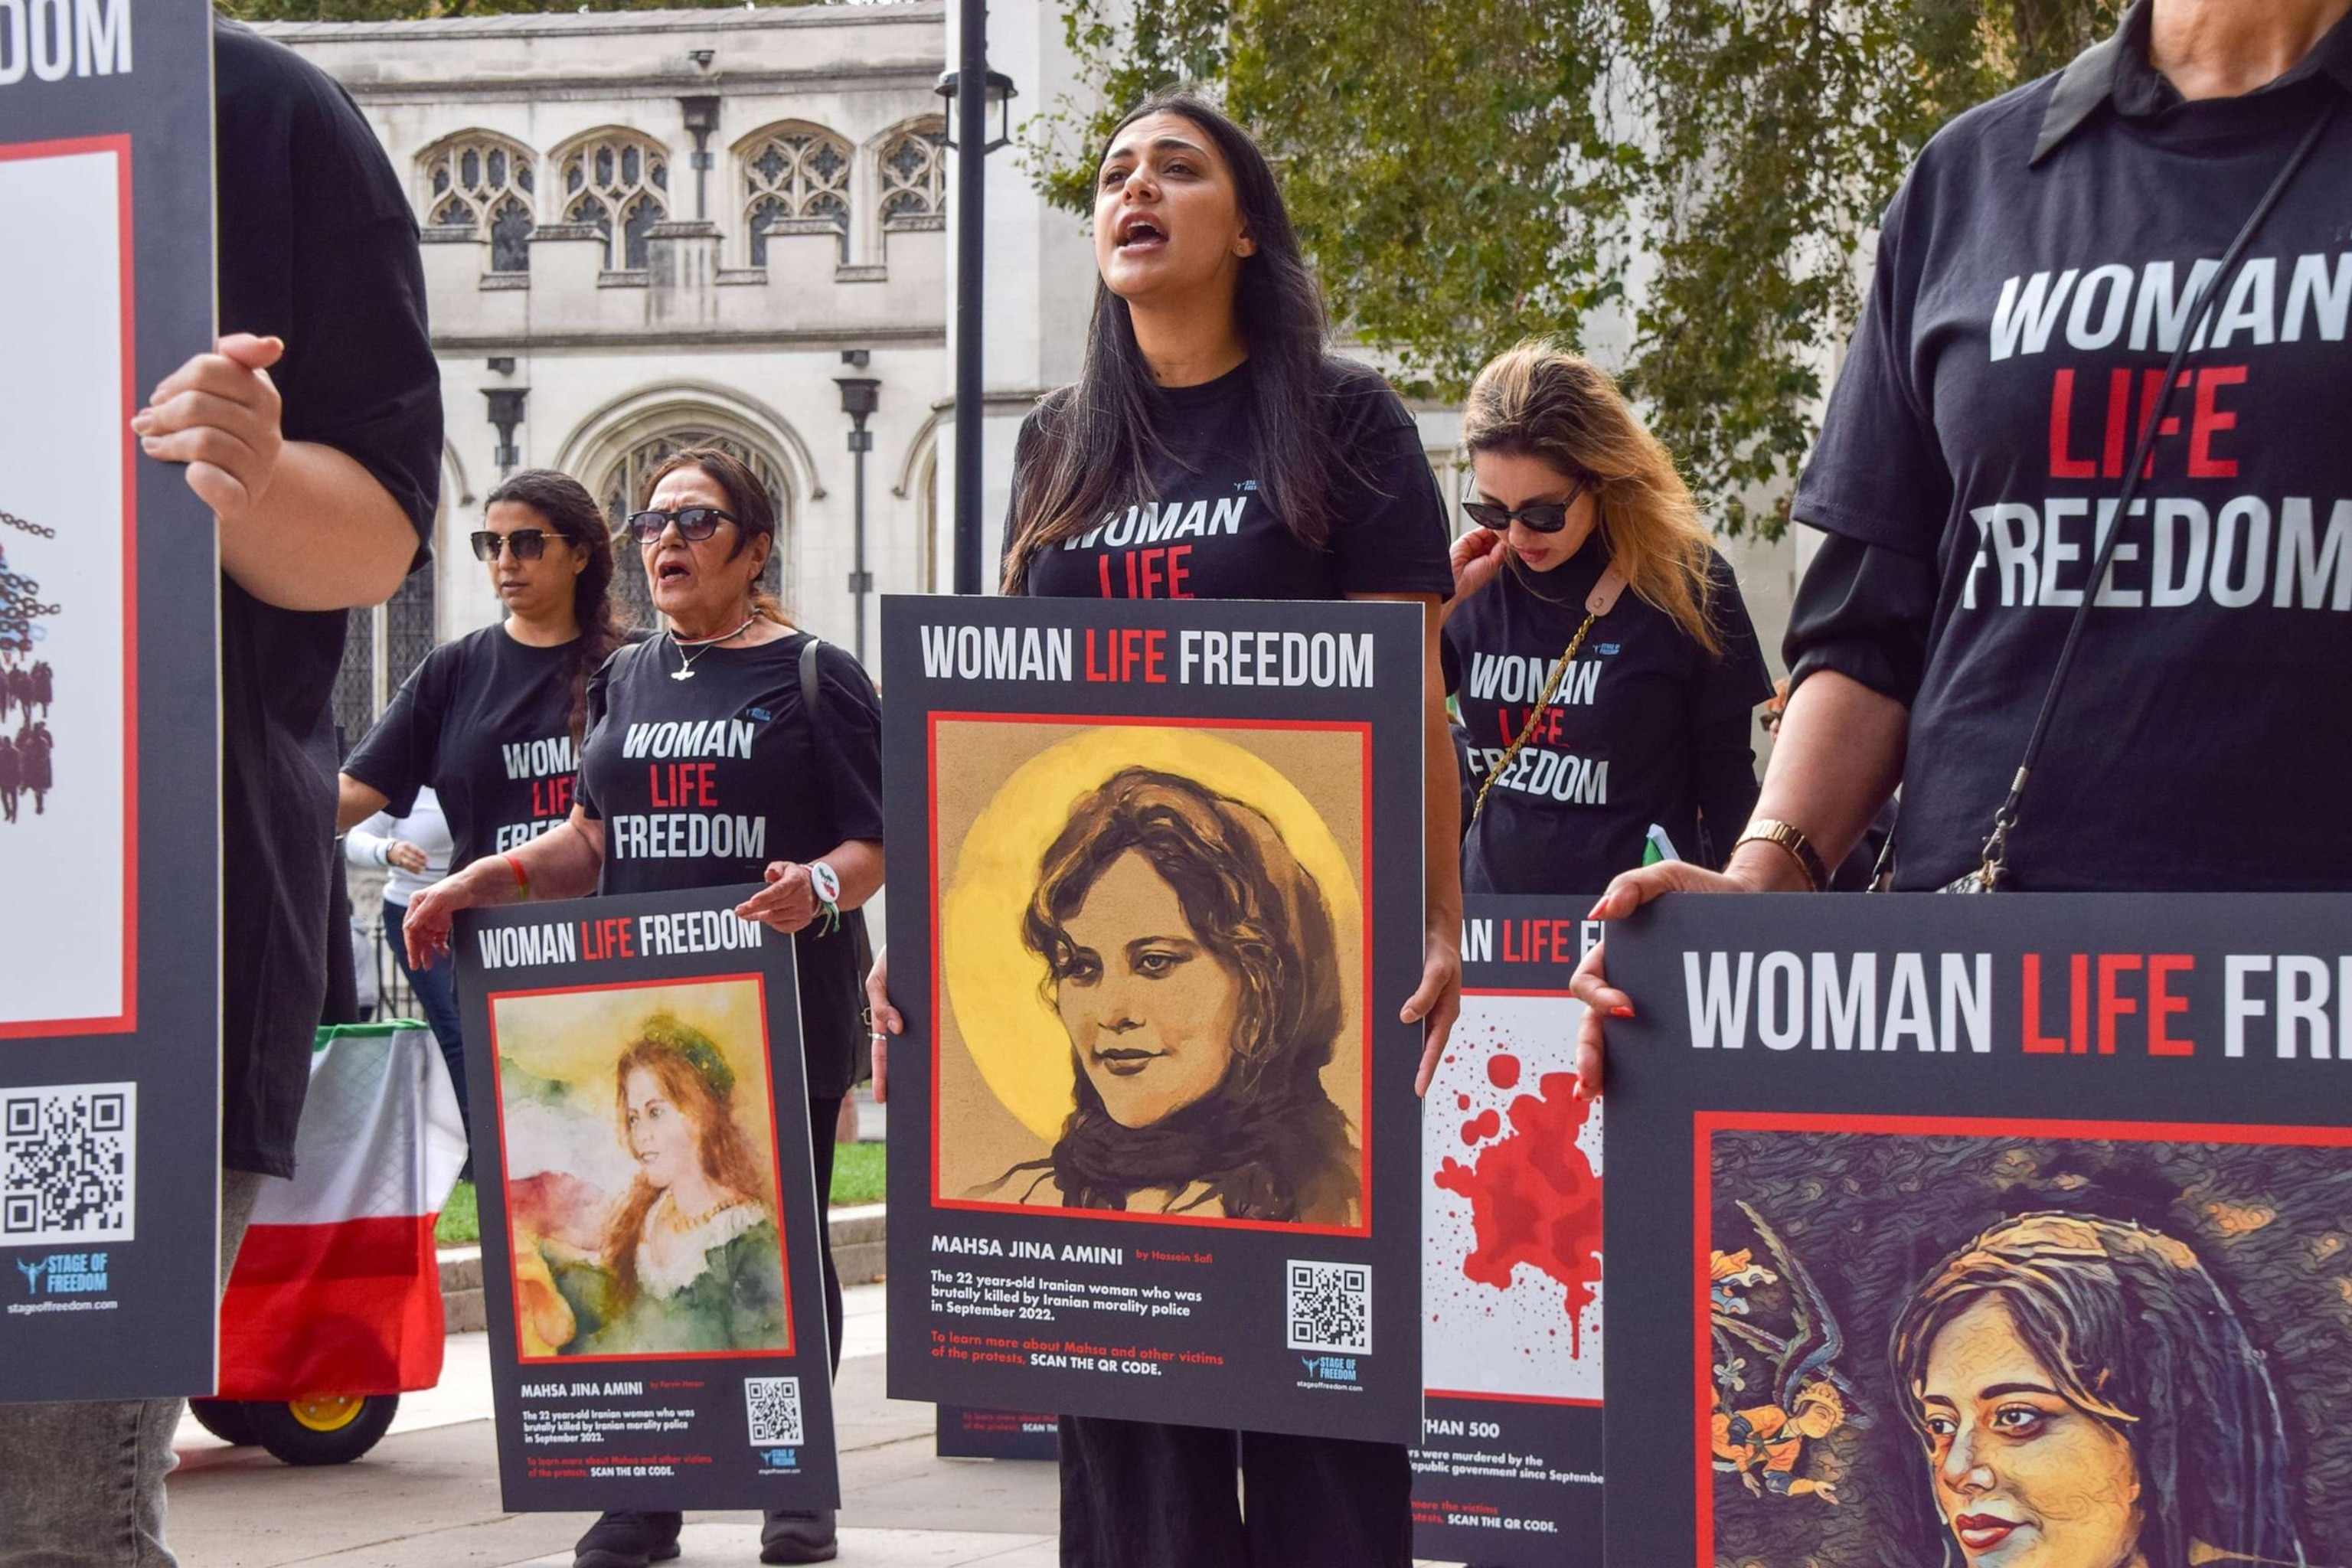 PHOTO: British Iranians staged a protest in Westminster against the Iran regime ahead of the first anniversary of the death of Mahsa Amini and the mass protests and crackdowns in Iran that followed, on Sept. 13, 2023, in London.